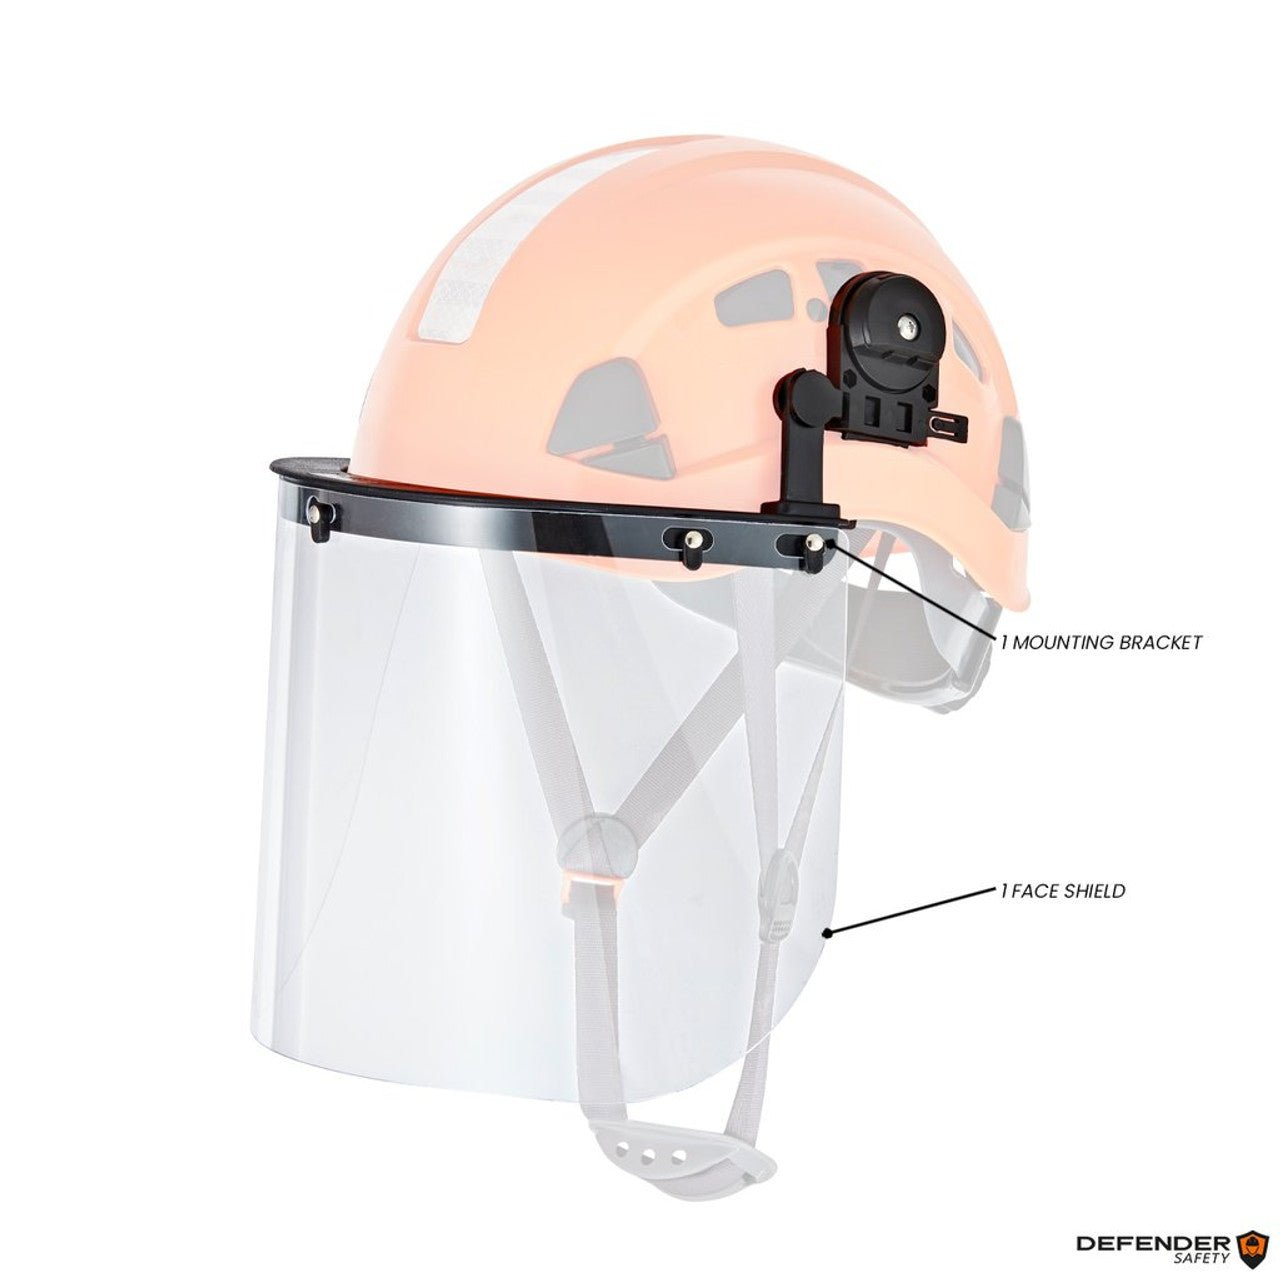 Z87 Face Shield and Mounting Bracket for Safety Helmets (H1 Series) - Defender Safety